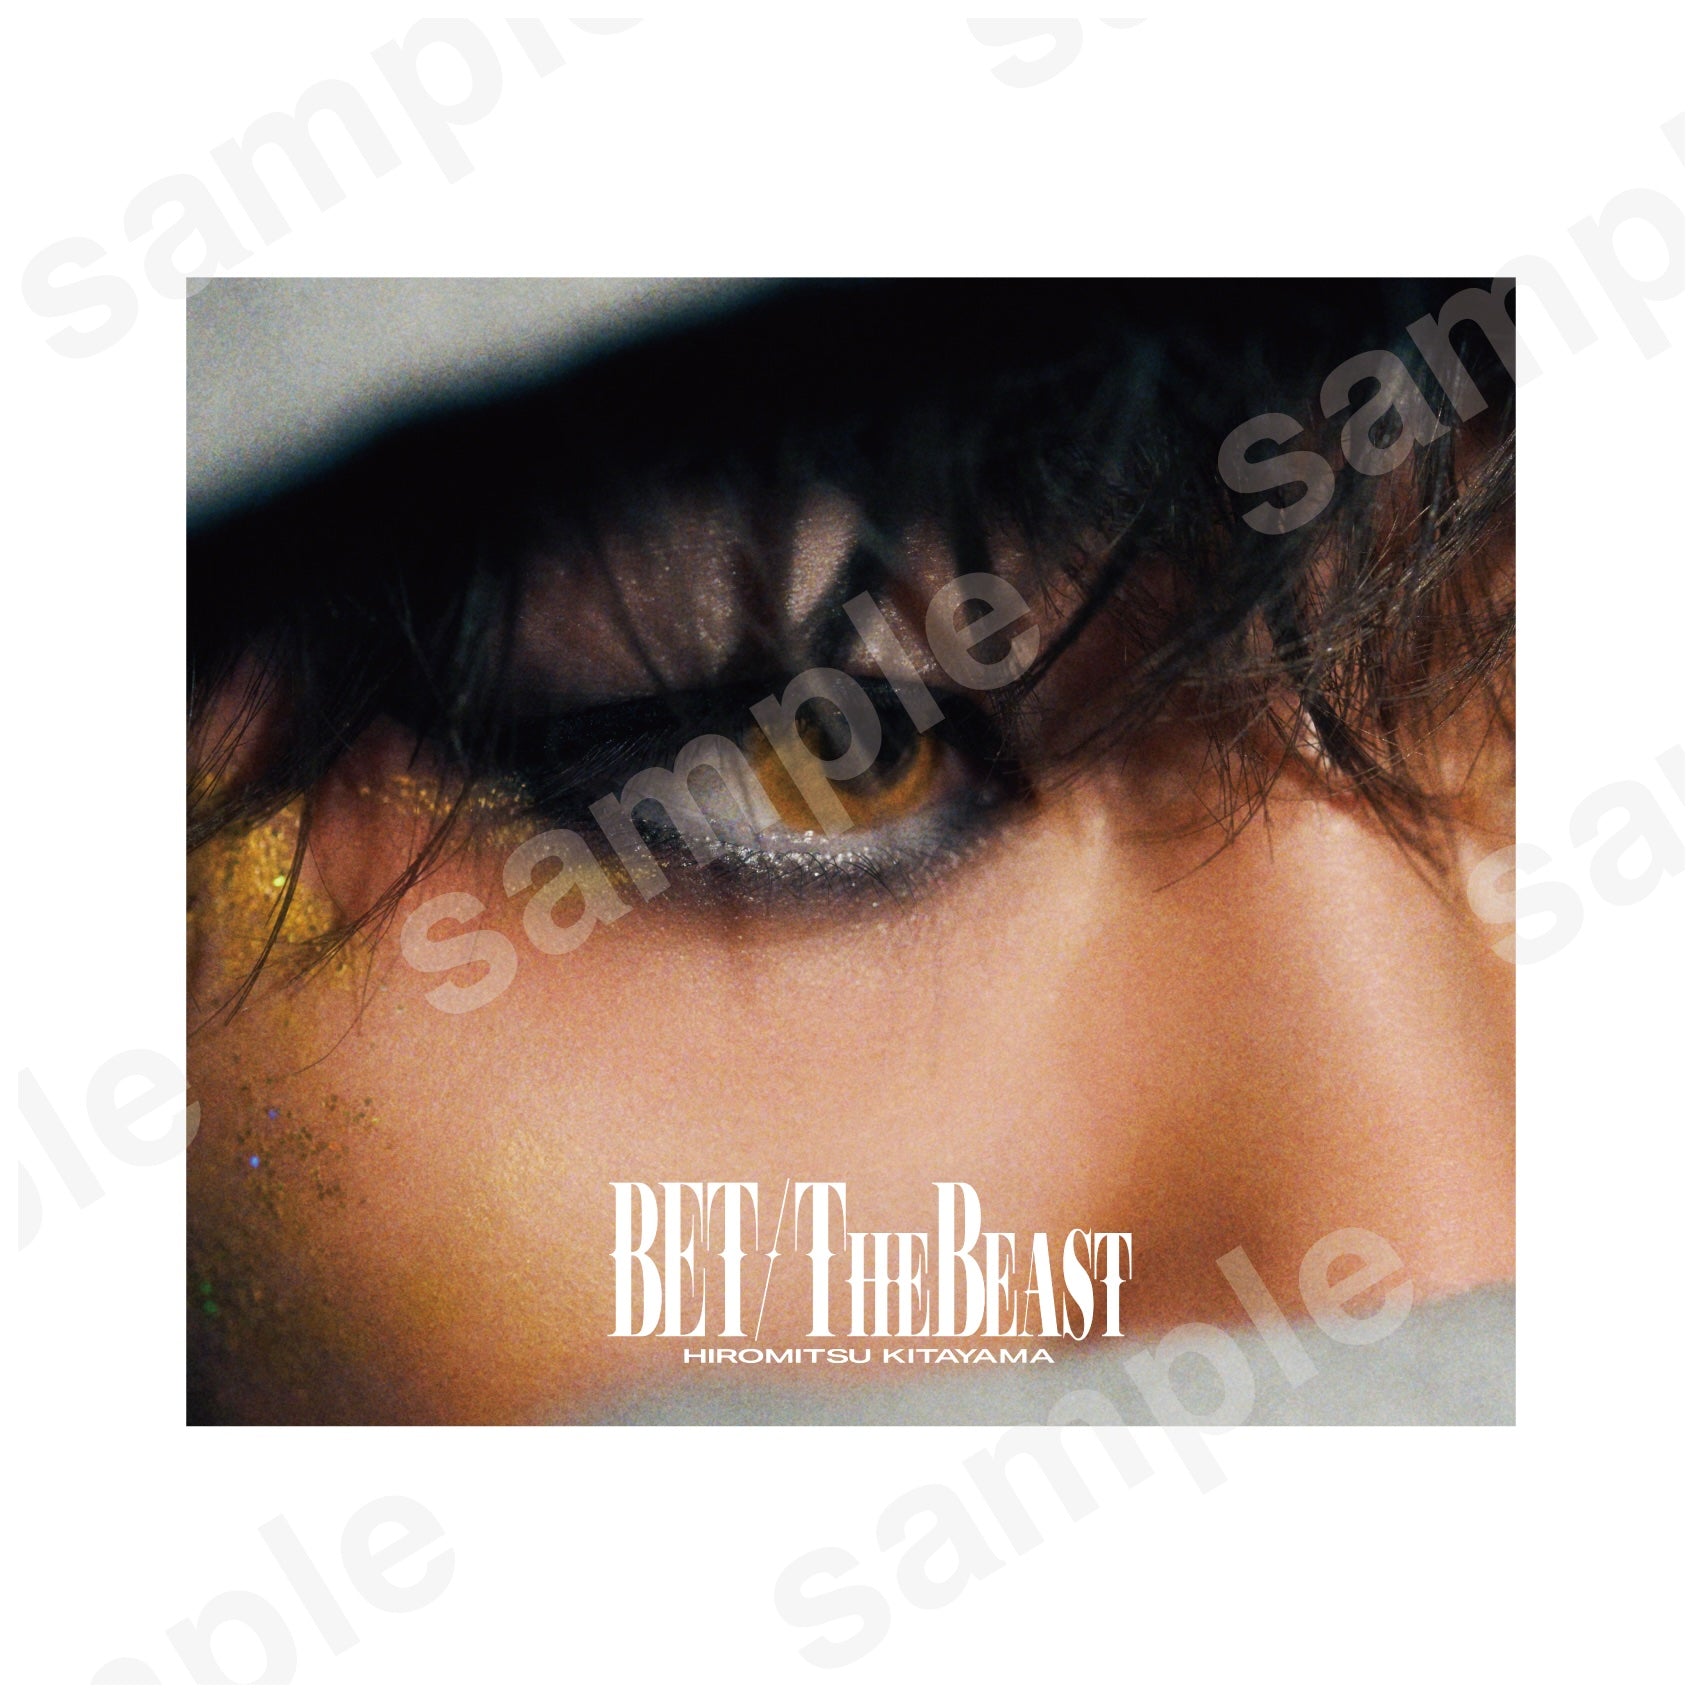 「BET／THE BEAST」初回生産限定盤B | TOBE OFFICIAL STORE